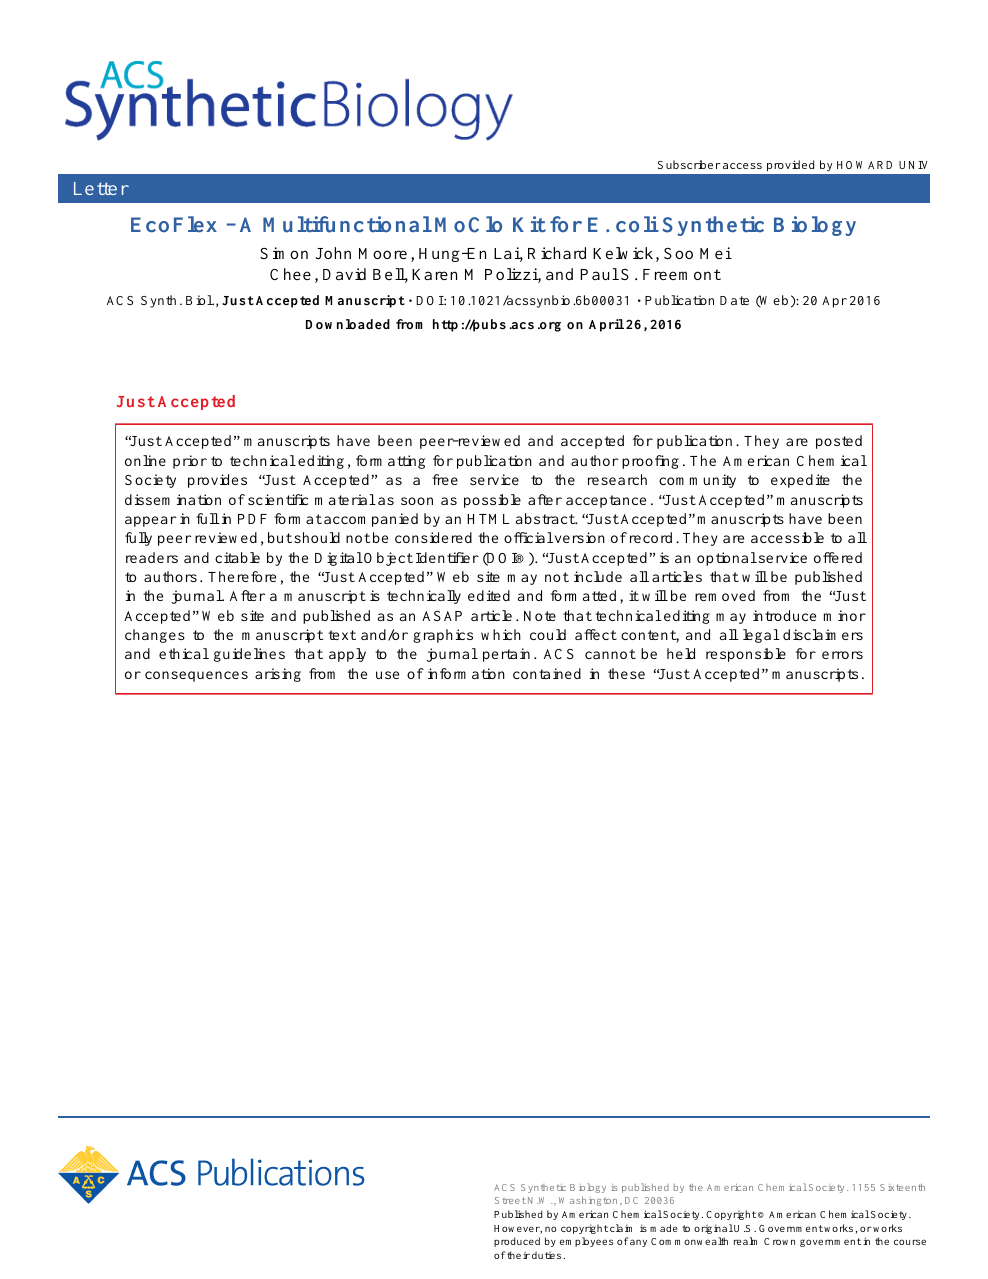 Ecoflex A Multifunctional Moclo Kit Fore Colisynthetic Biology Topic Of Research Paper In Biological Sciences Download Scholarly Article Pdf And Read For Free On Cyberleninka Open Science Hub